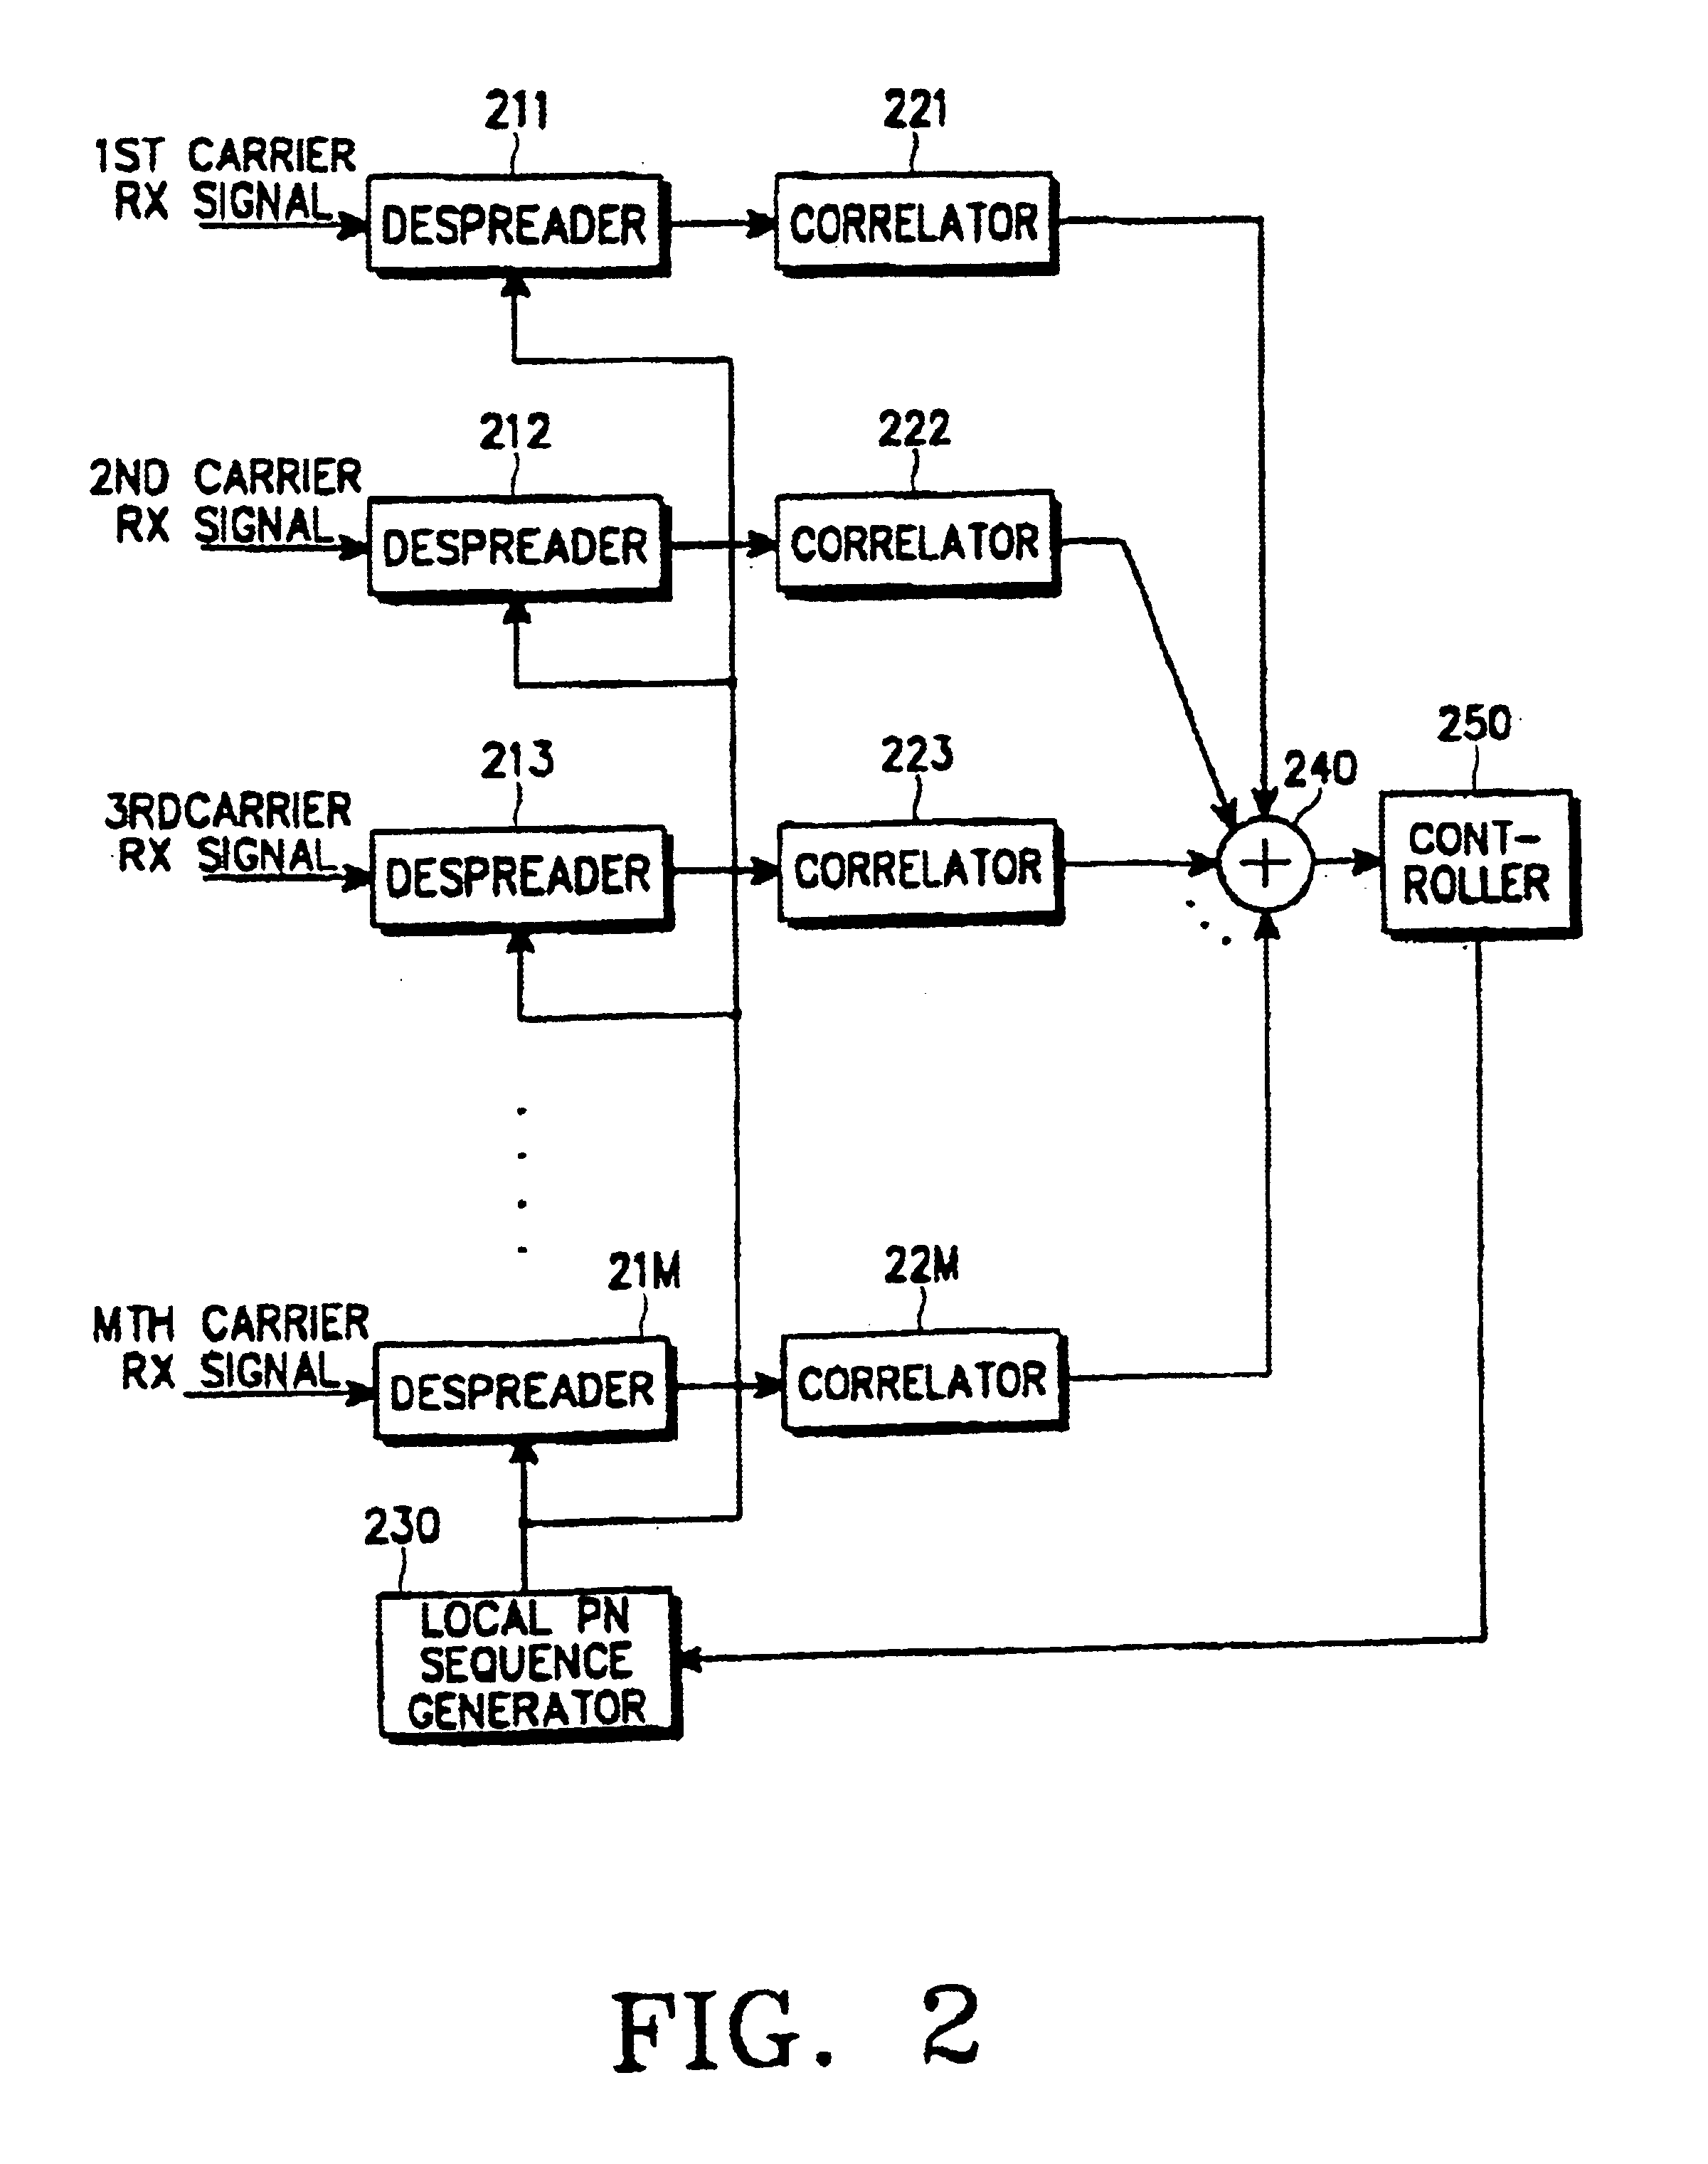 Apparatus and method for acquiring PN sequence in multicarrier CDMA mobile communication system